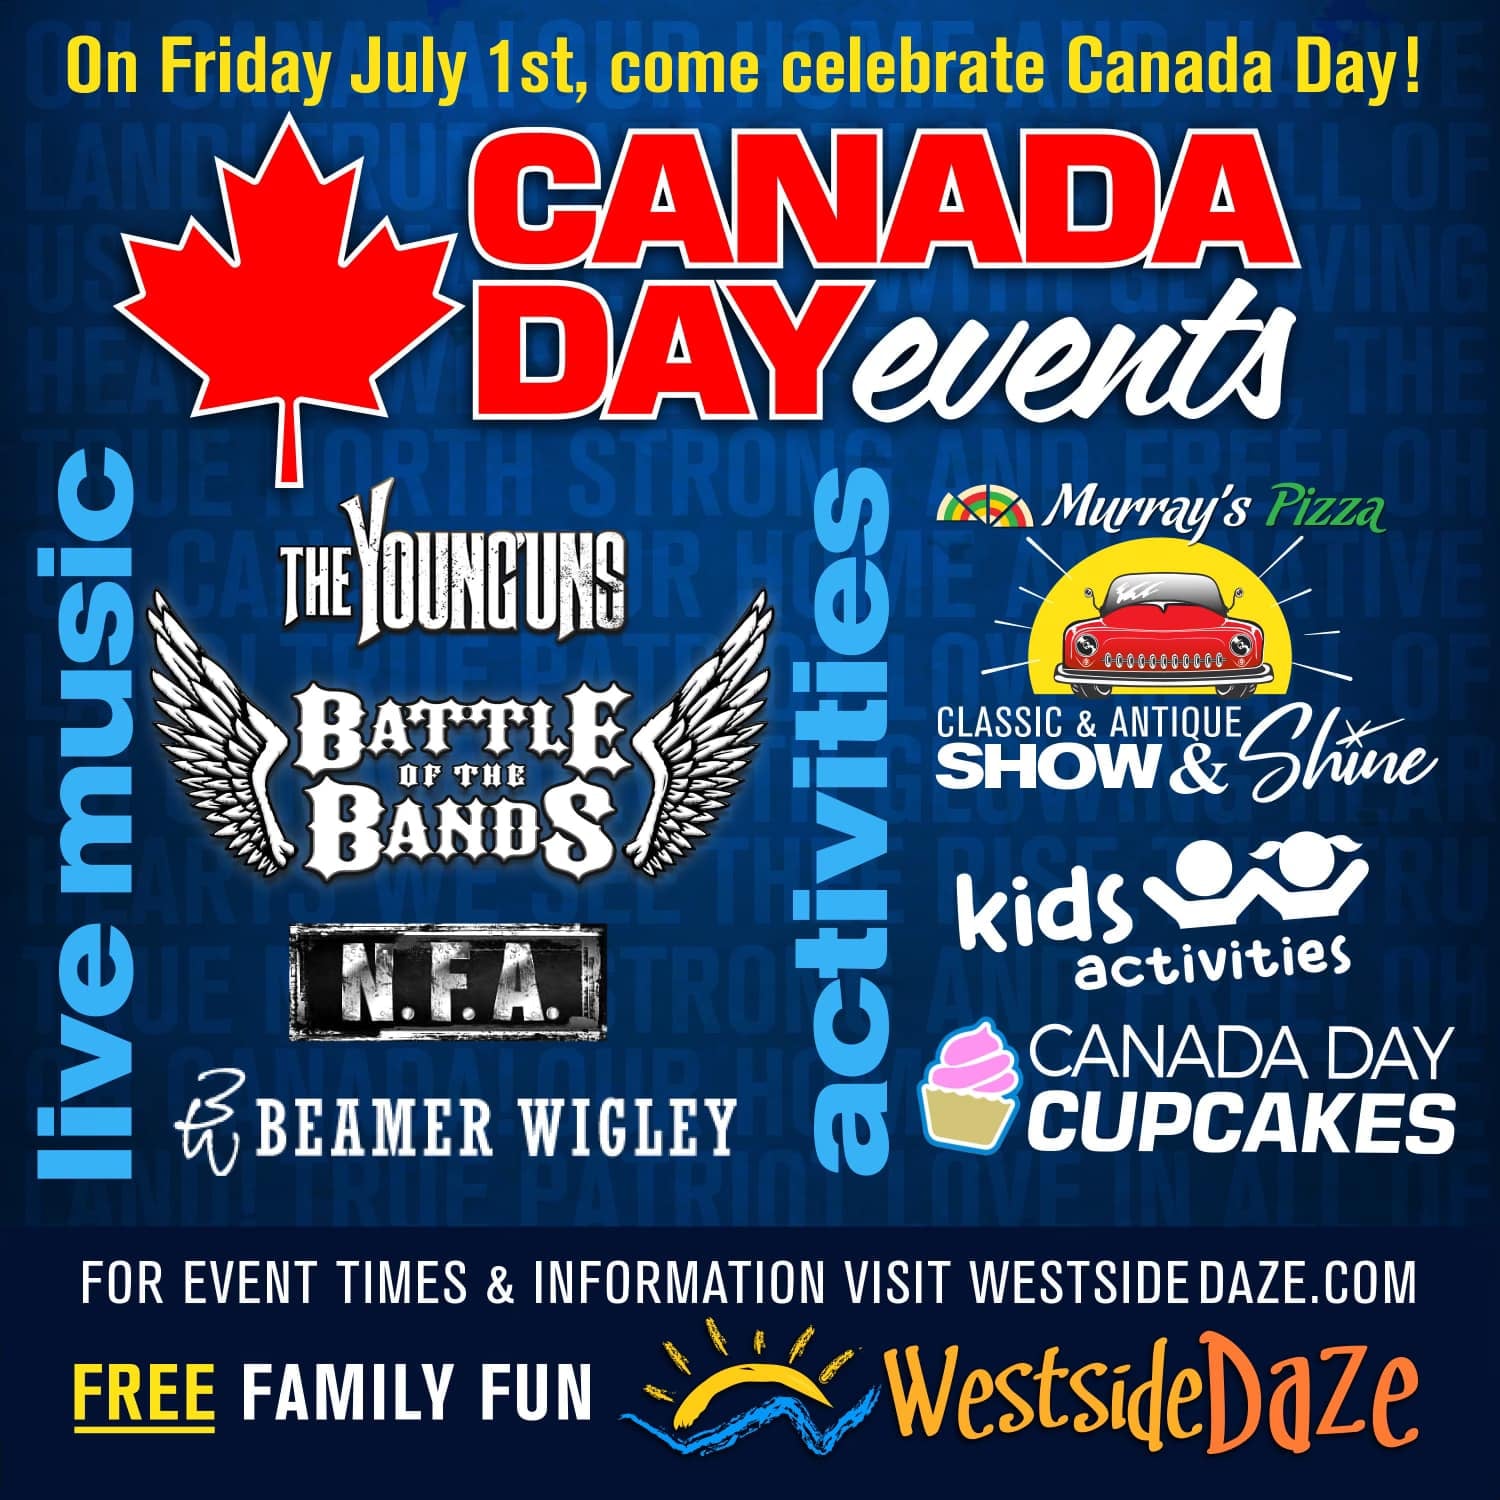 The Westside Daze Celebration Society is proud to announce our July 1 Canada Day